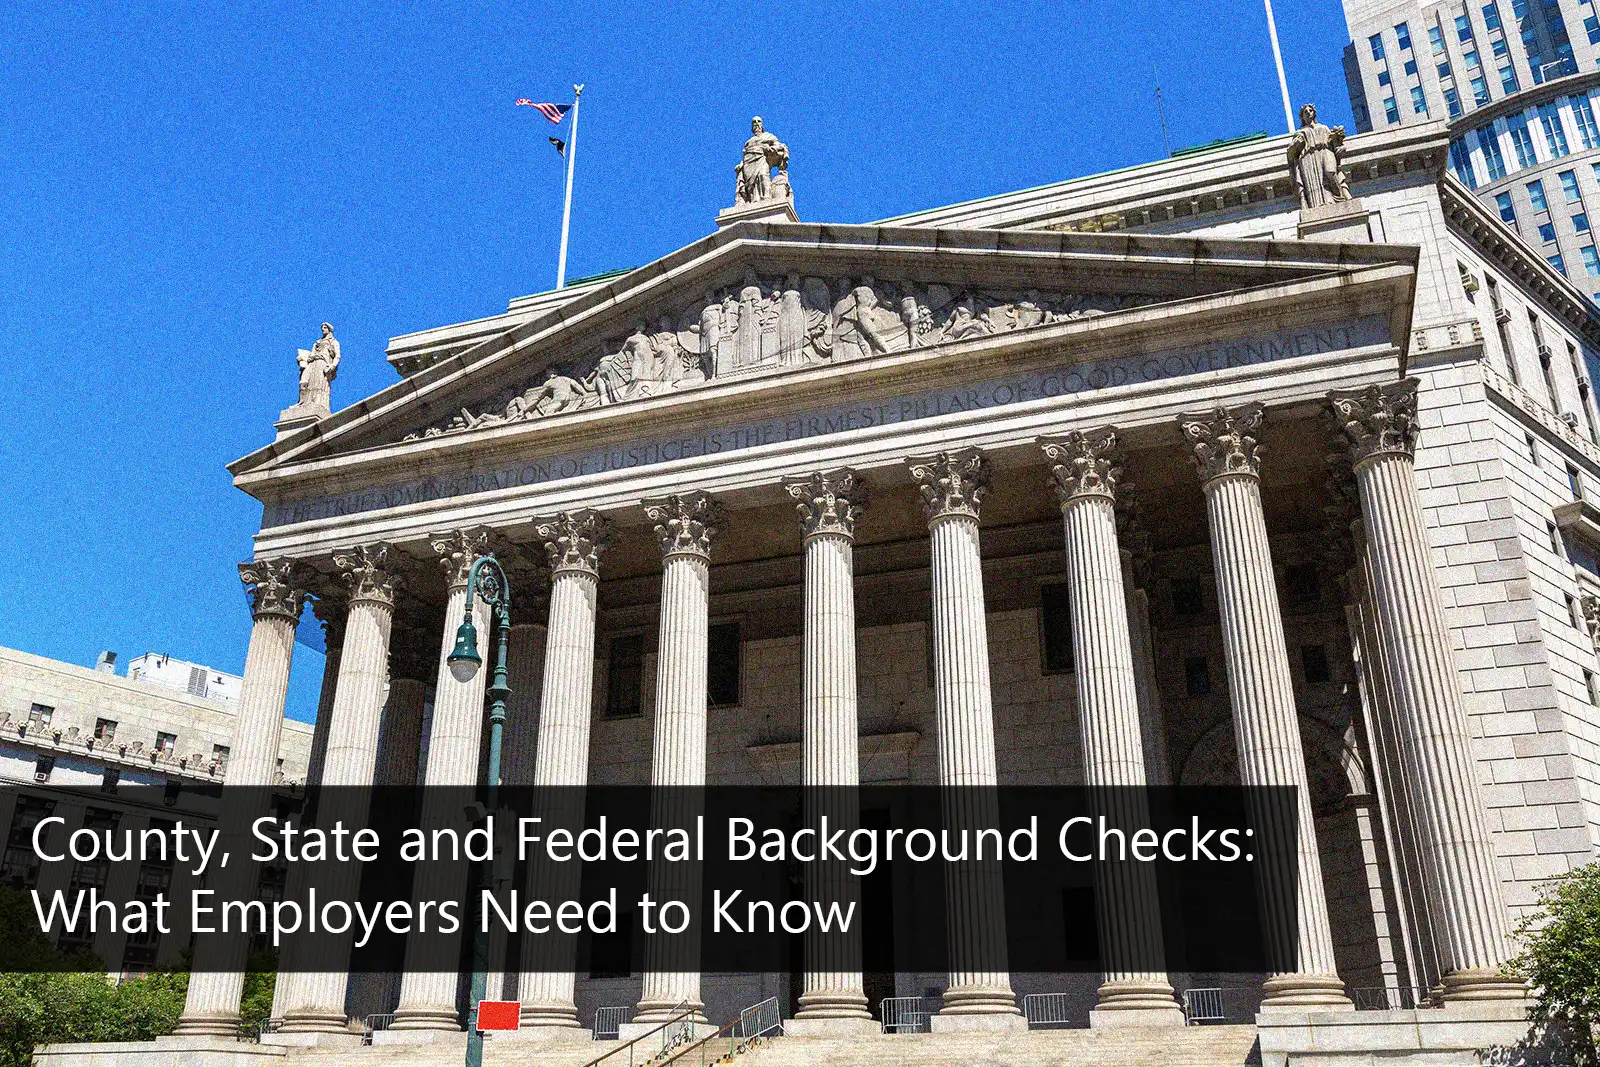 County, State & Federal Background Checks: What Employers Need to Know